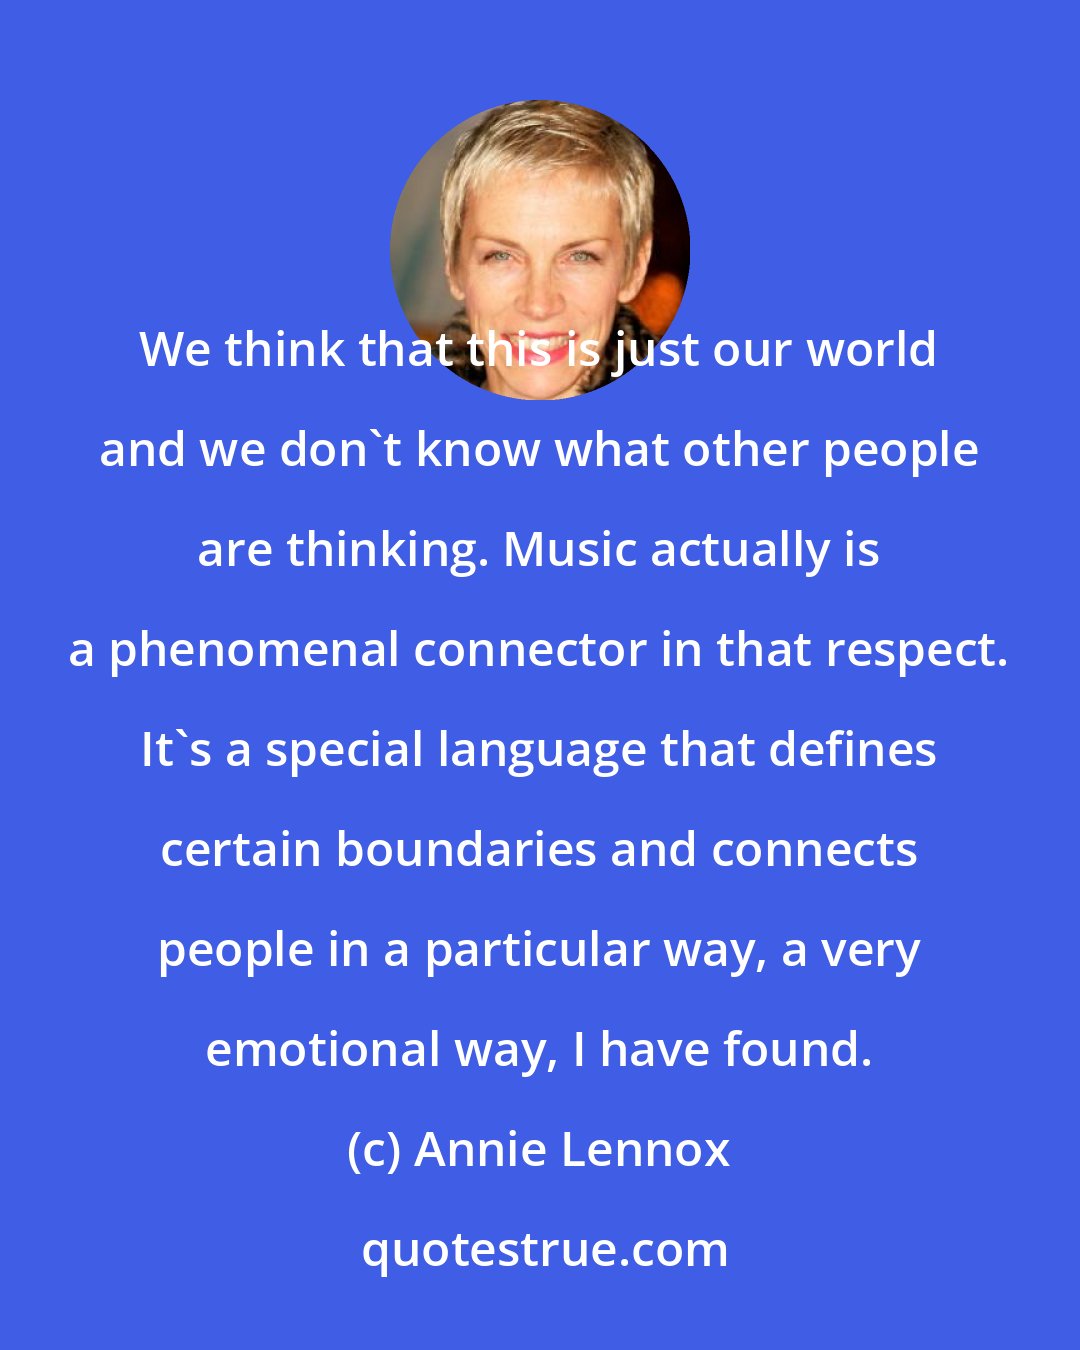 Annie Lennox: We think that this is just our world and we don't know what other people are thinking. Music actually is a phenomenal connector in that respect. It's a special language that defines certain boundaries and connects people in a particular way, a very emotional way, I have found.